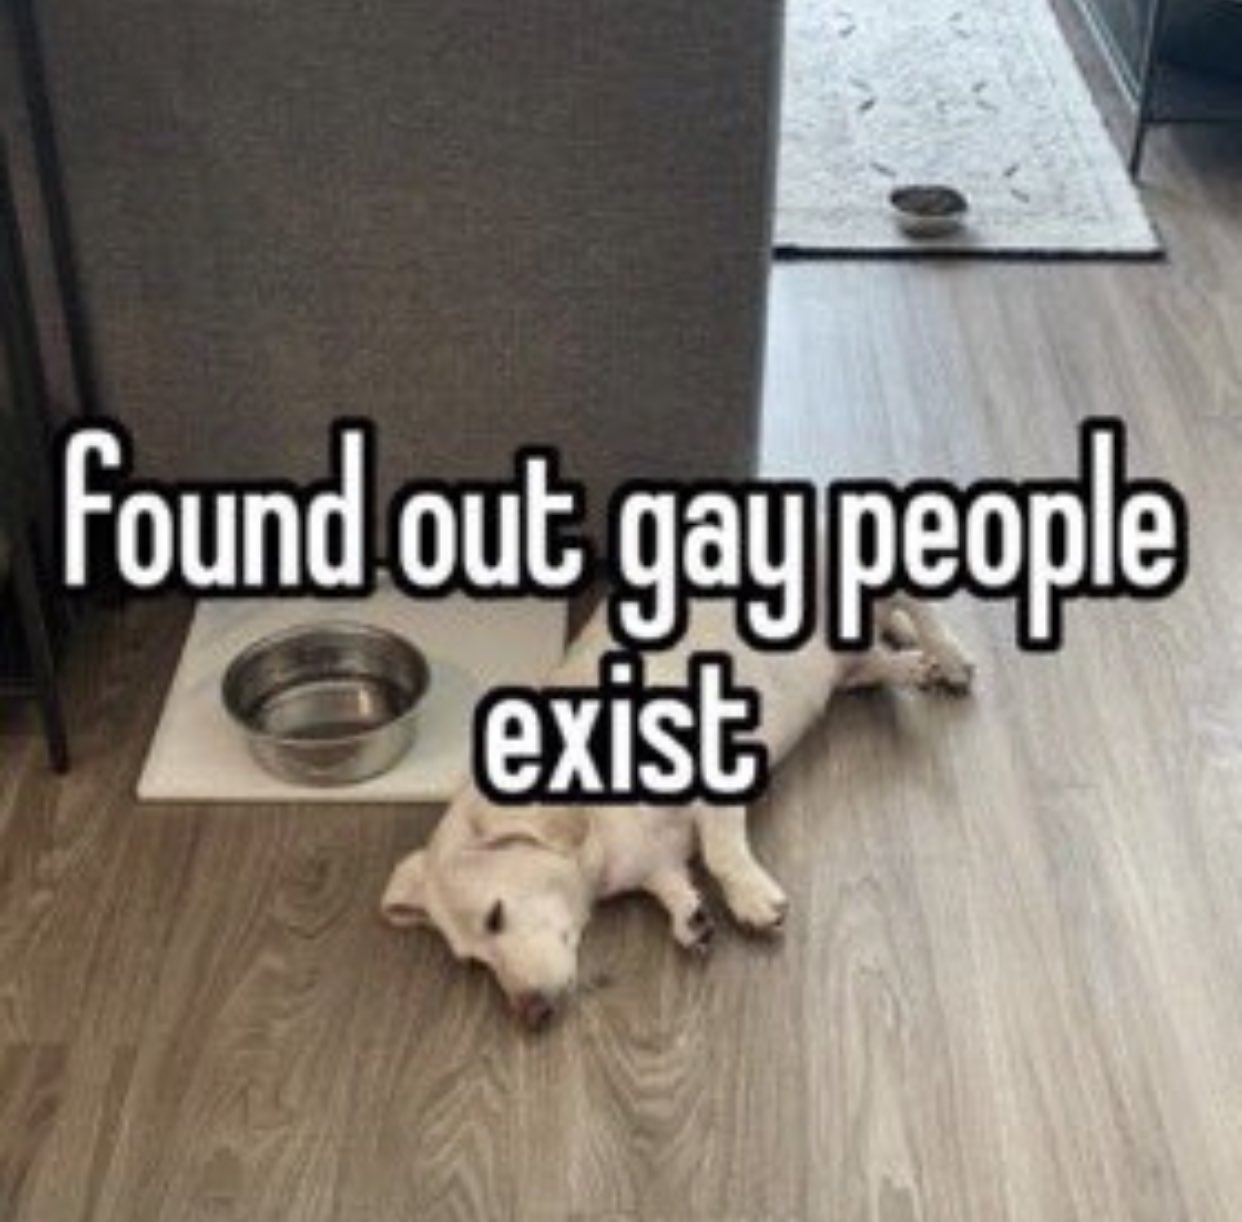 that homophobic dog meme with text:found out gay people exist